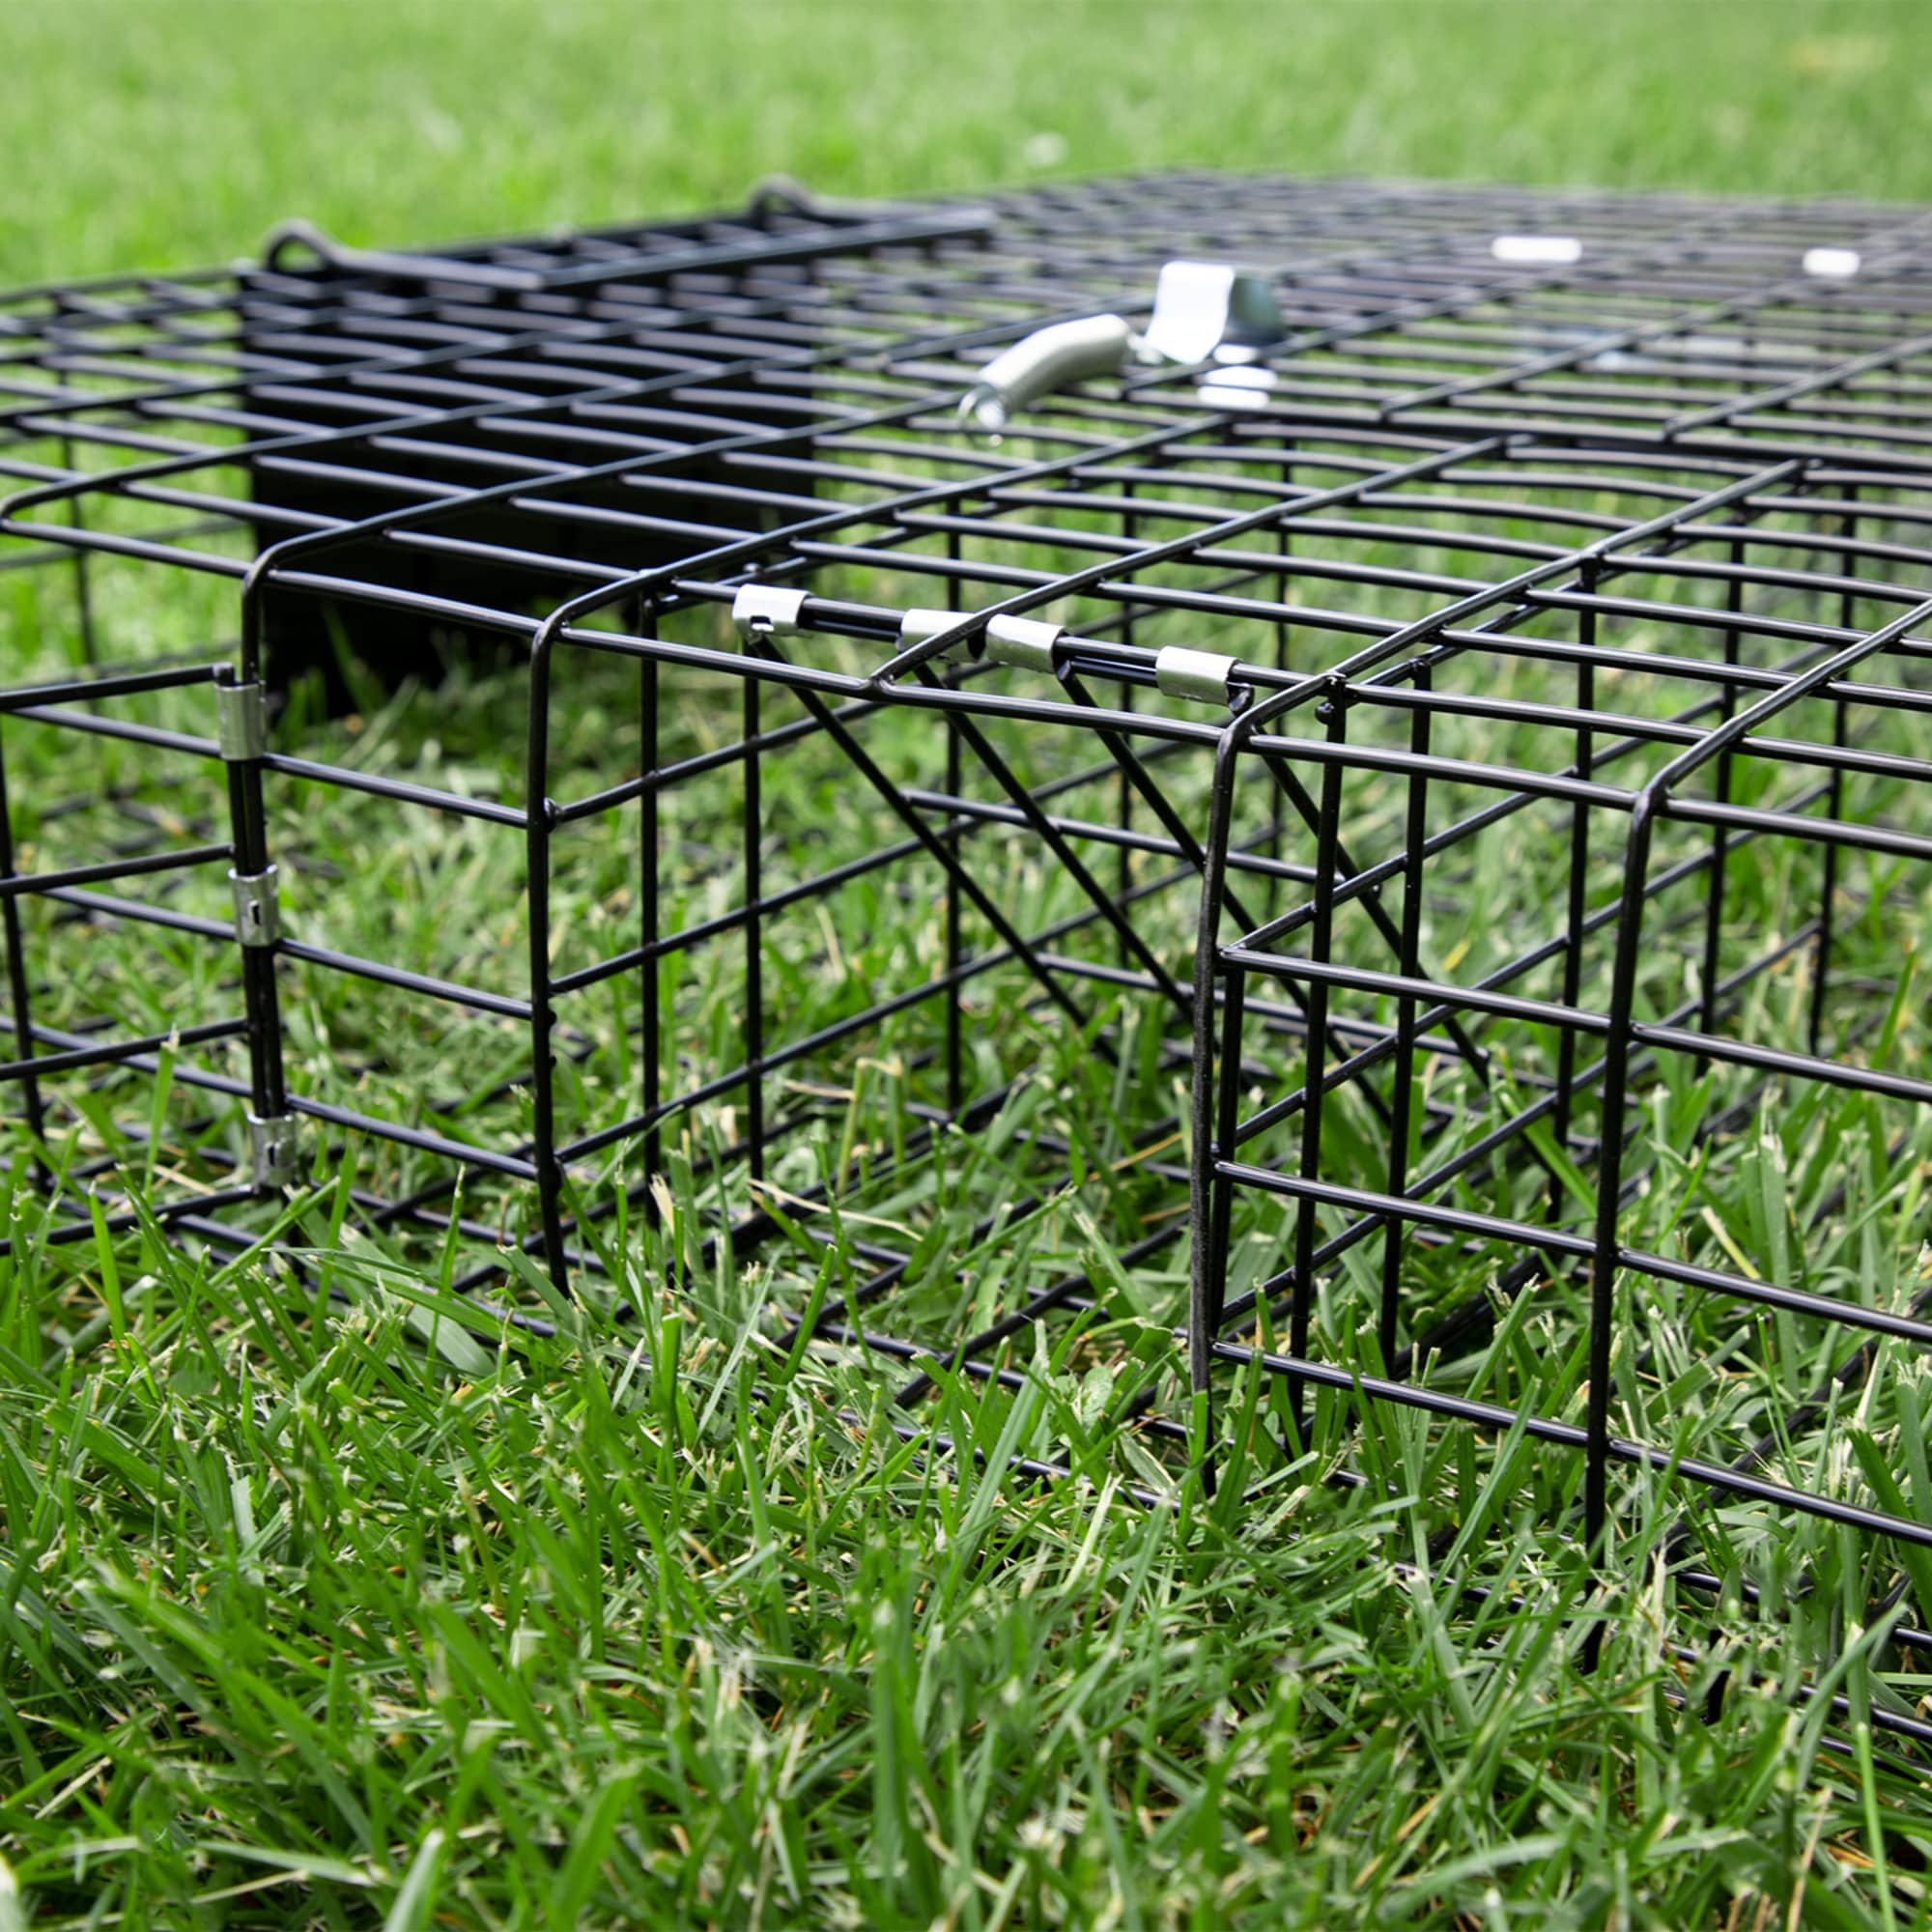 Rugged Ranch Large Metal Wire Live Catch & Release Trap Cage W/ Easy Open  Top Lid & 2 Door System : Target